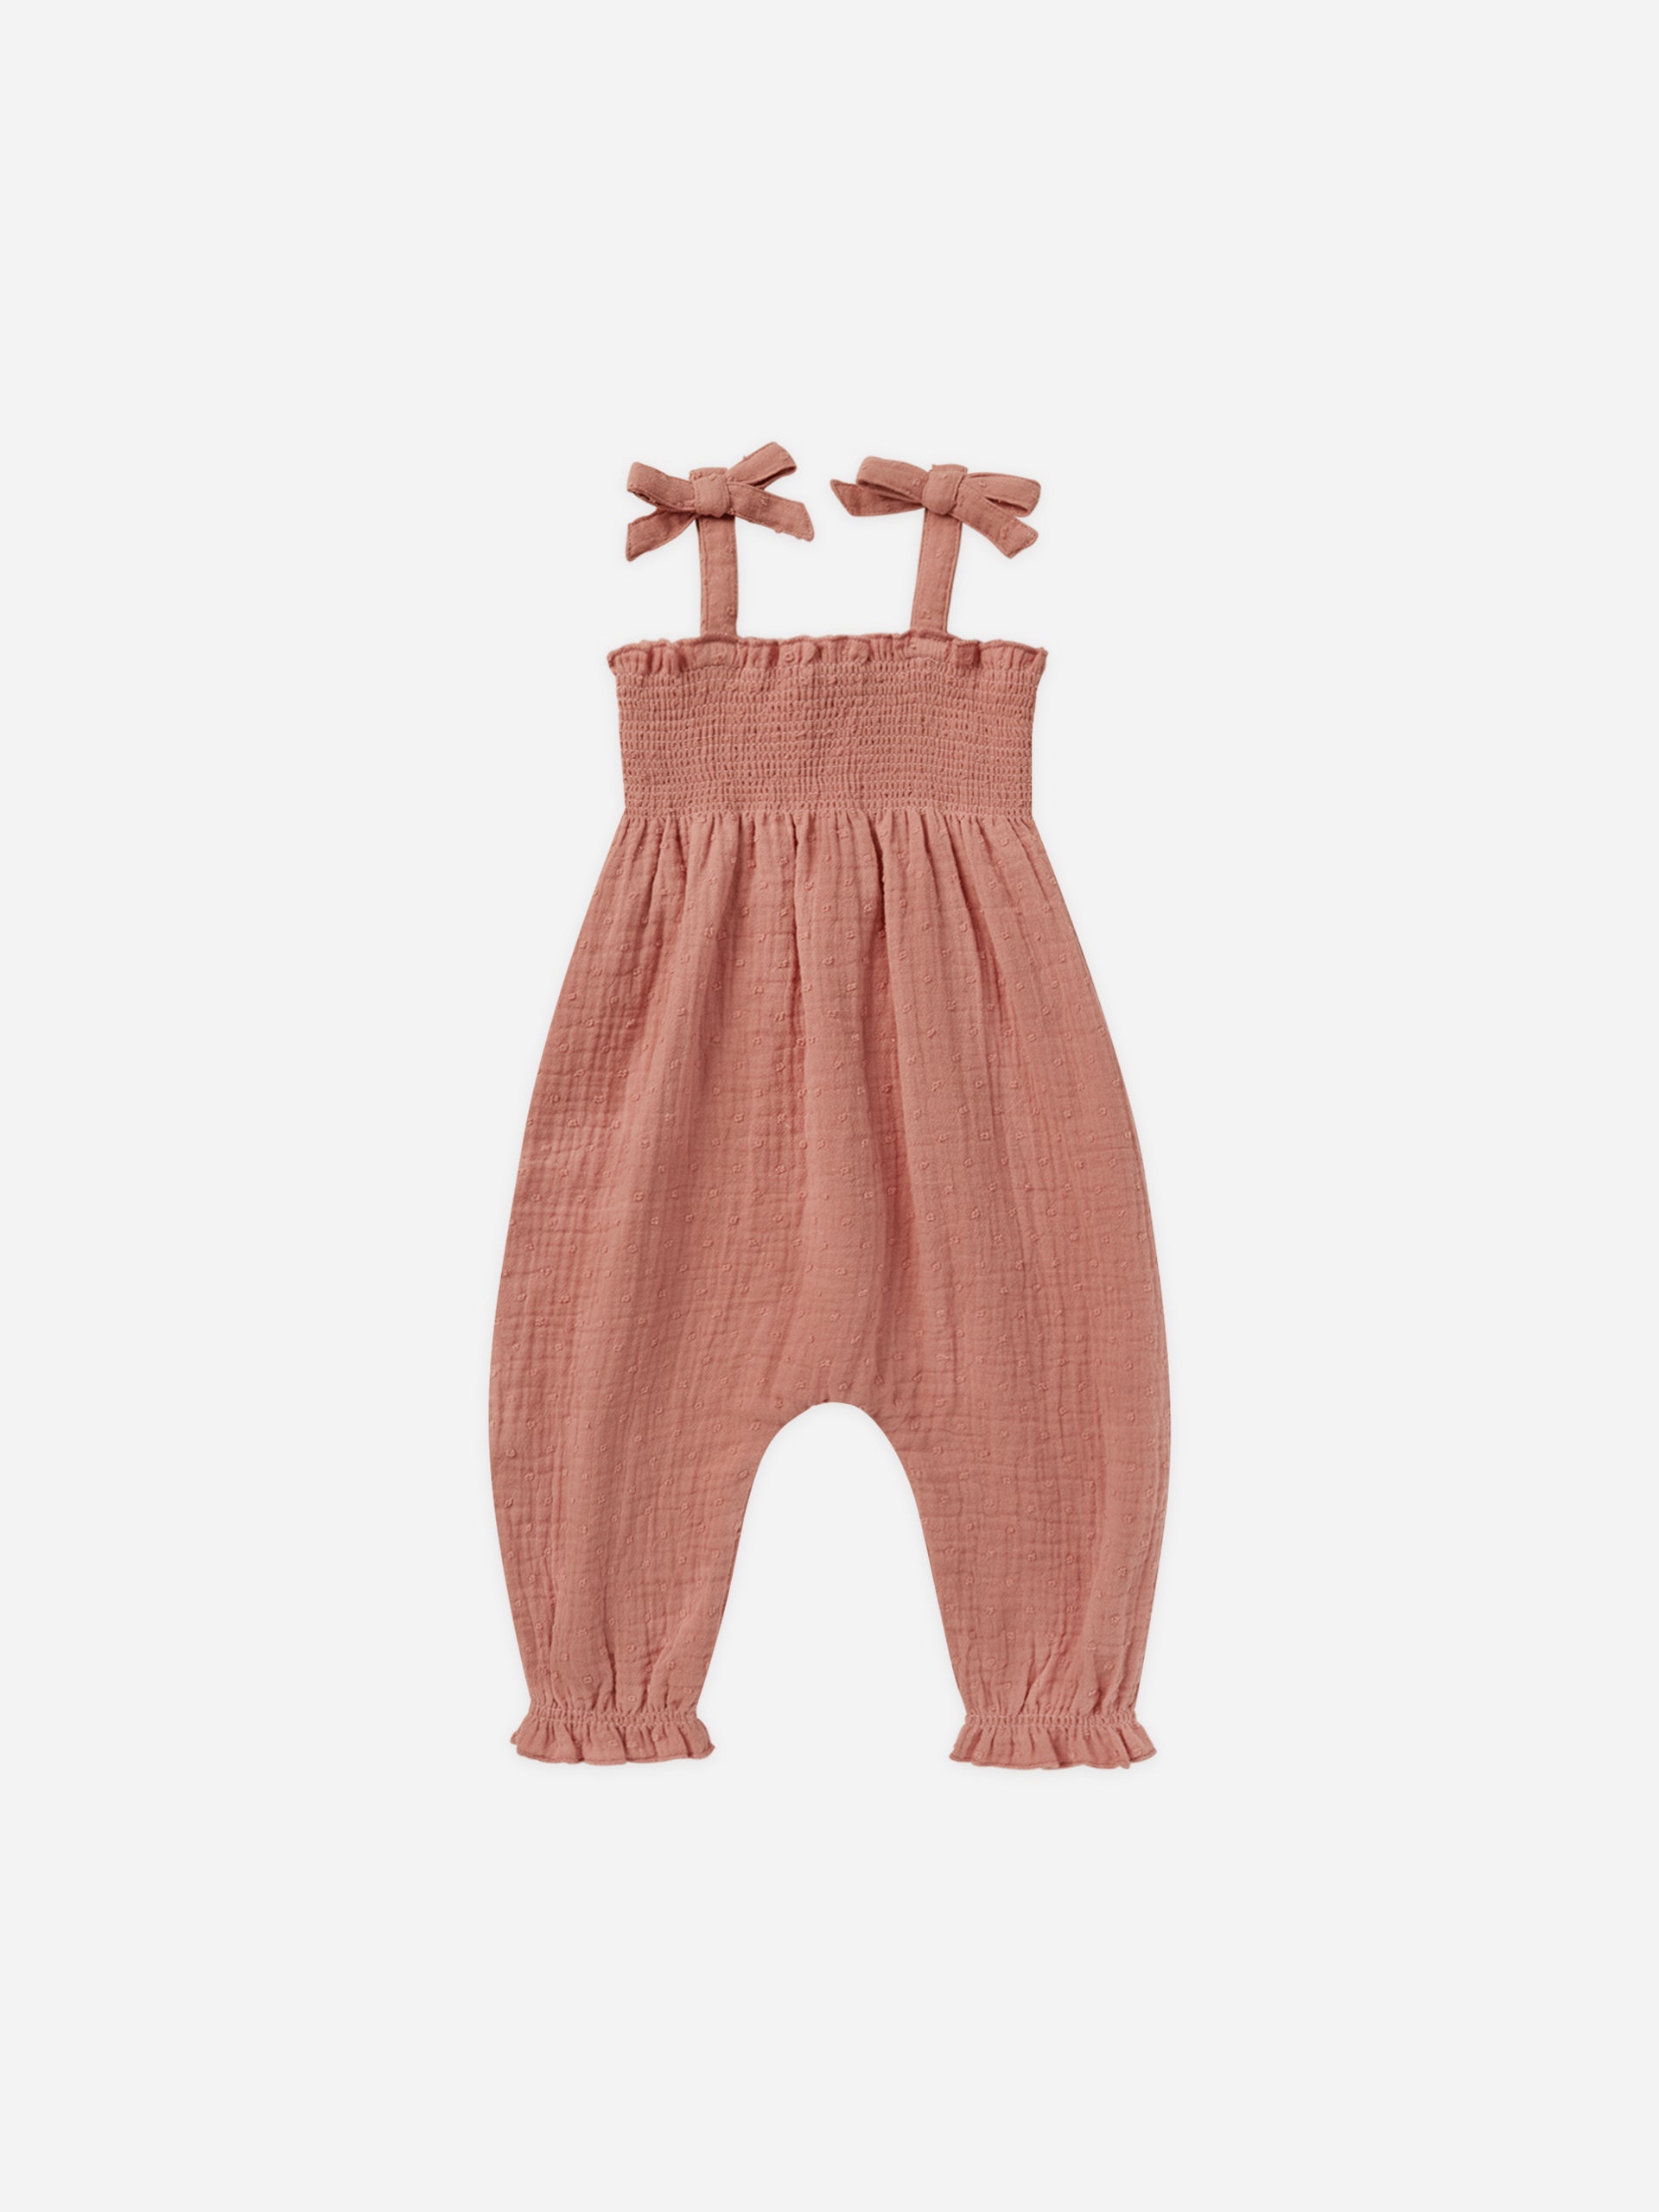 Sawyer Jumpsuit || Lipstick - Rylee + Cru | Kids Clothes | Trendy Baby Clothes | Modern Infant Outfits |